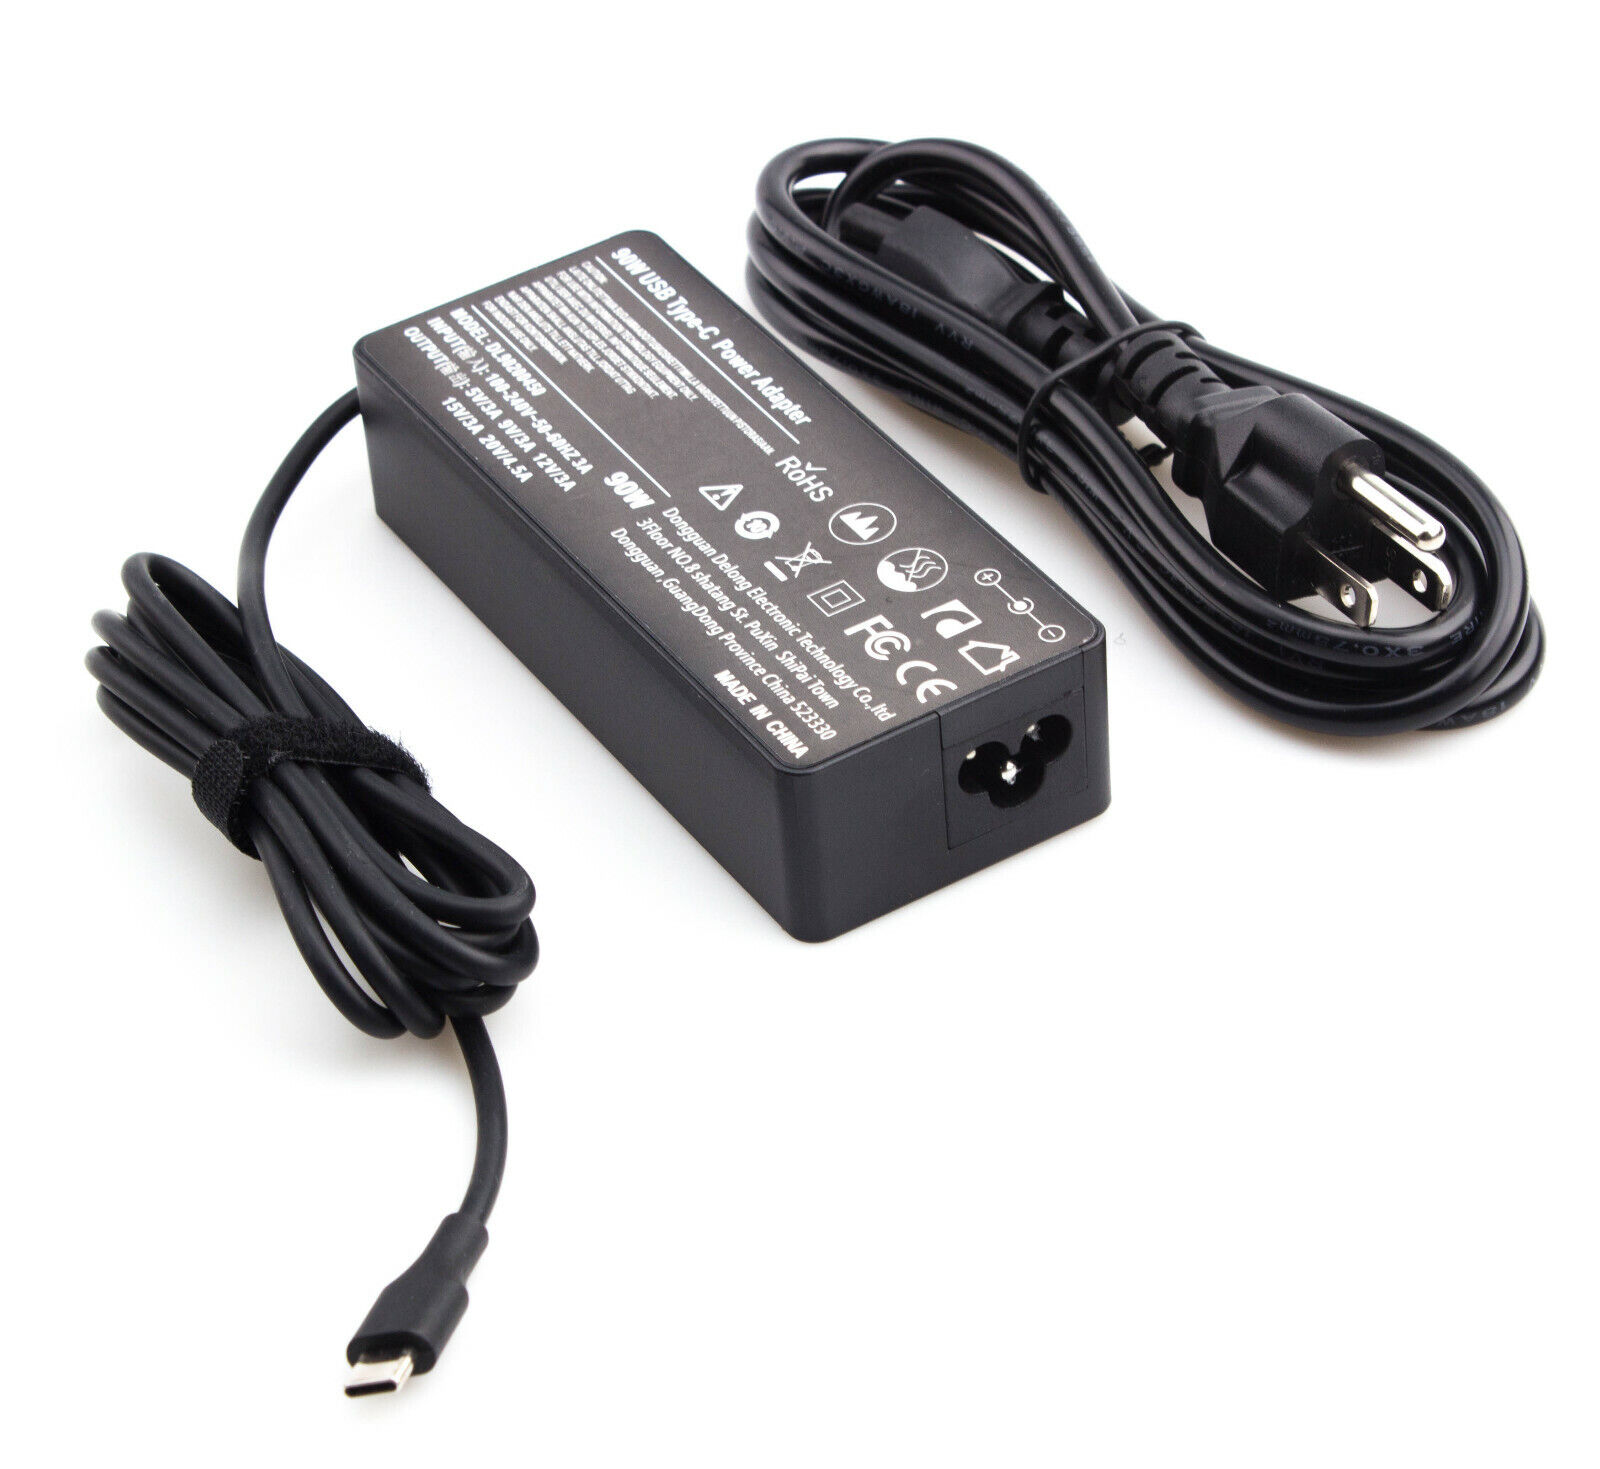 90W USB-C Power Charger 0TDK33 TDK33 for Dell Precision 3540 3541 3550 5550 5570